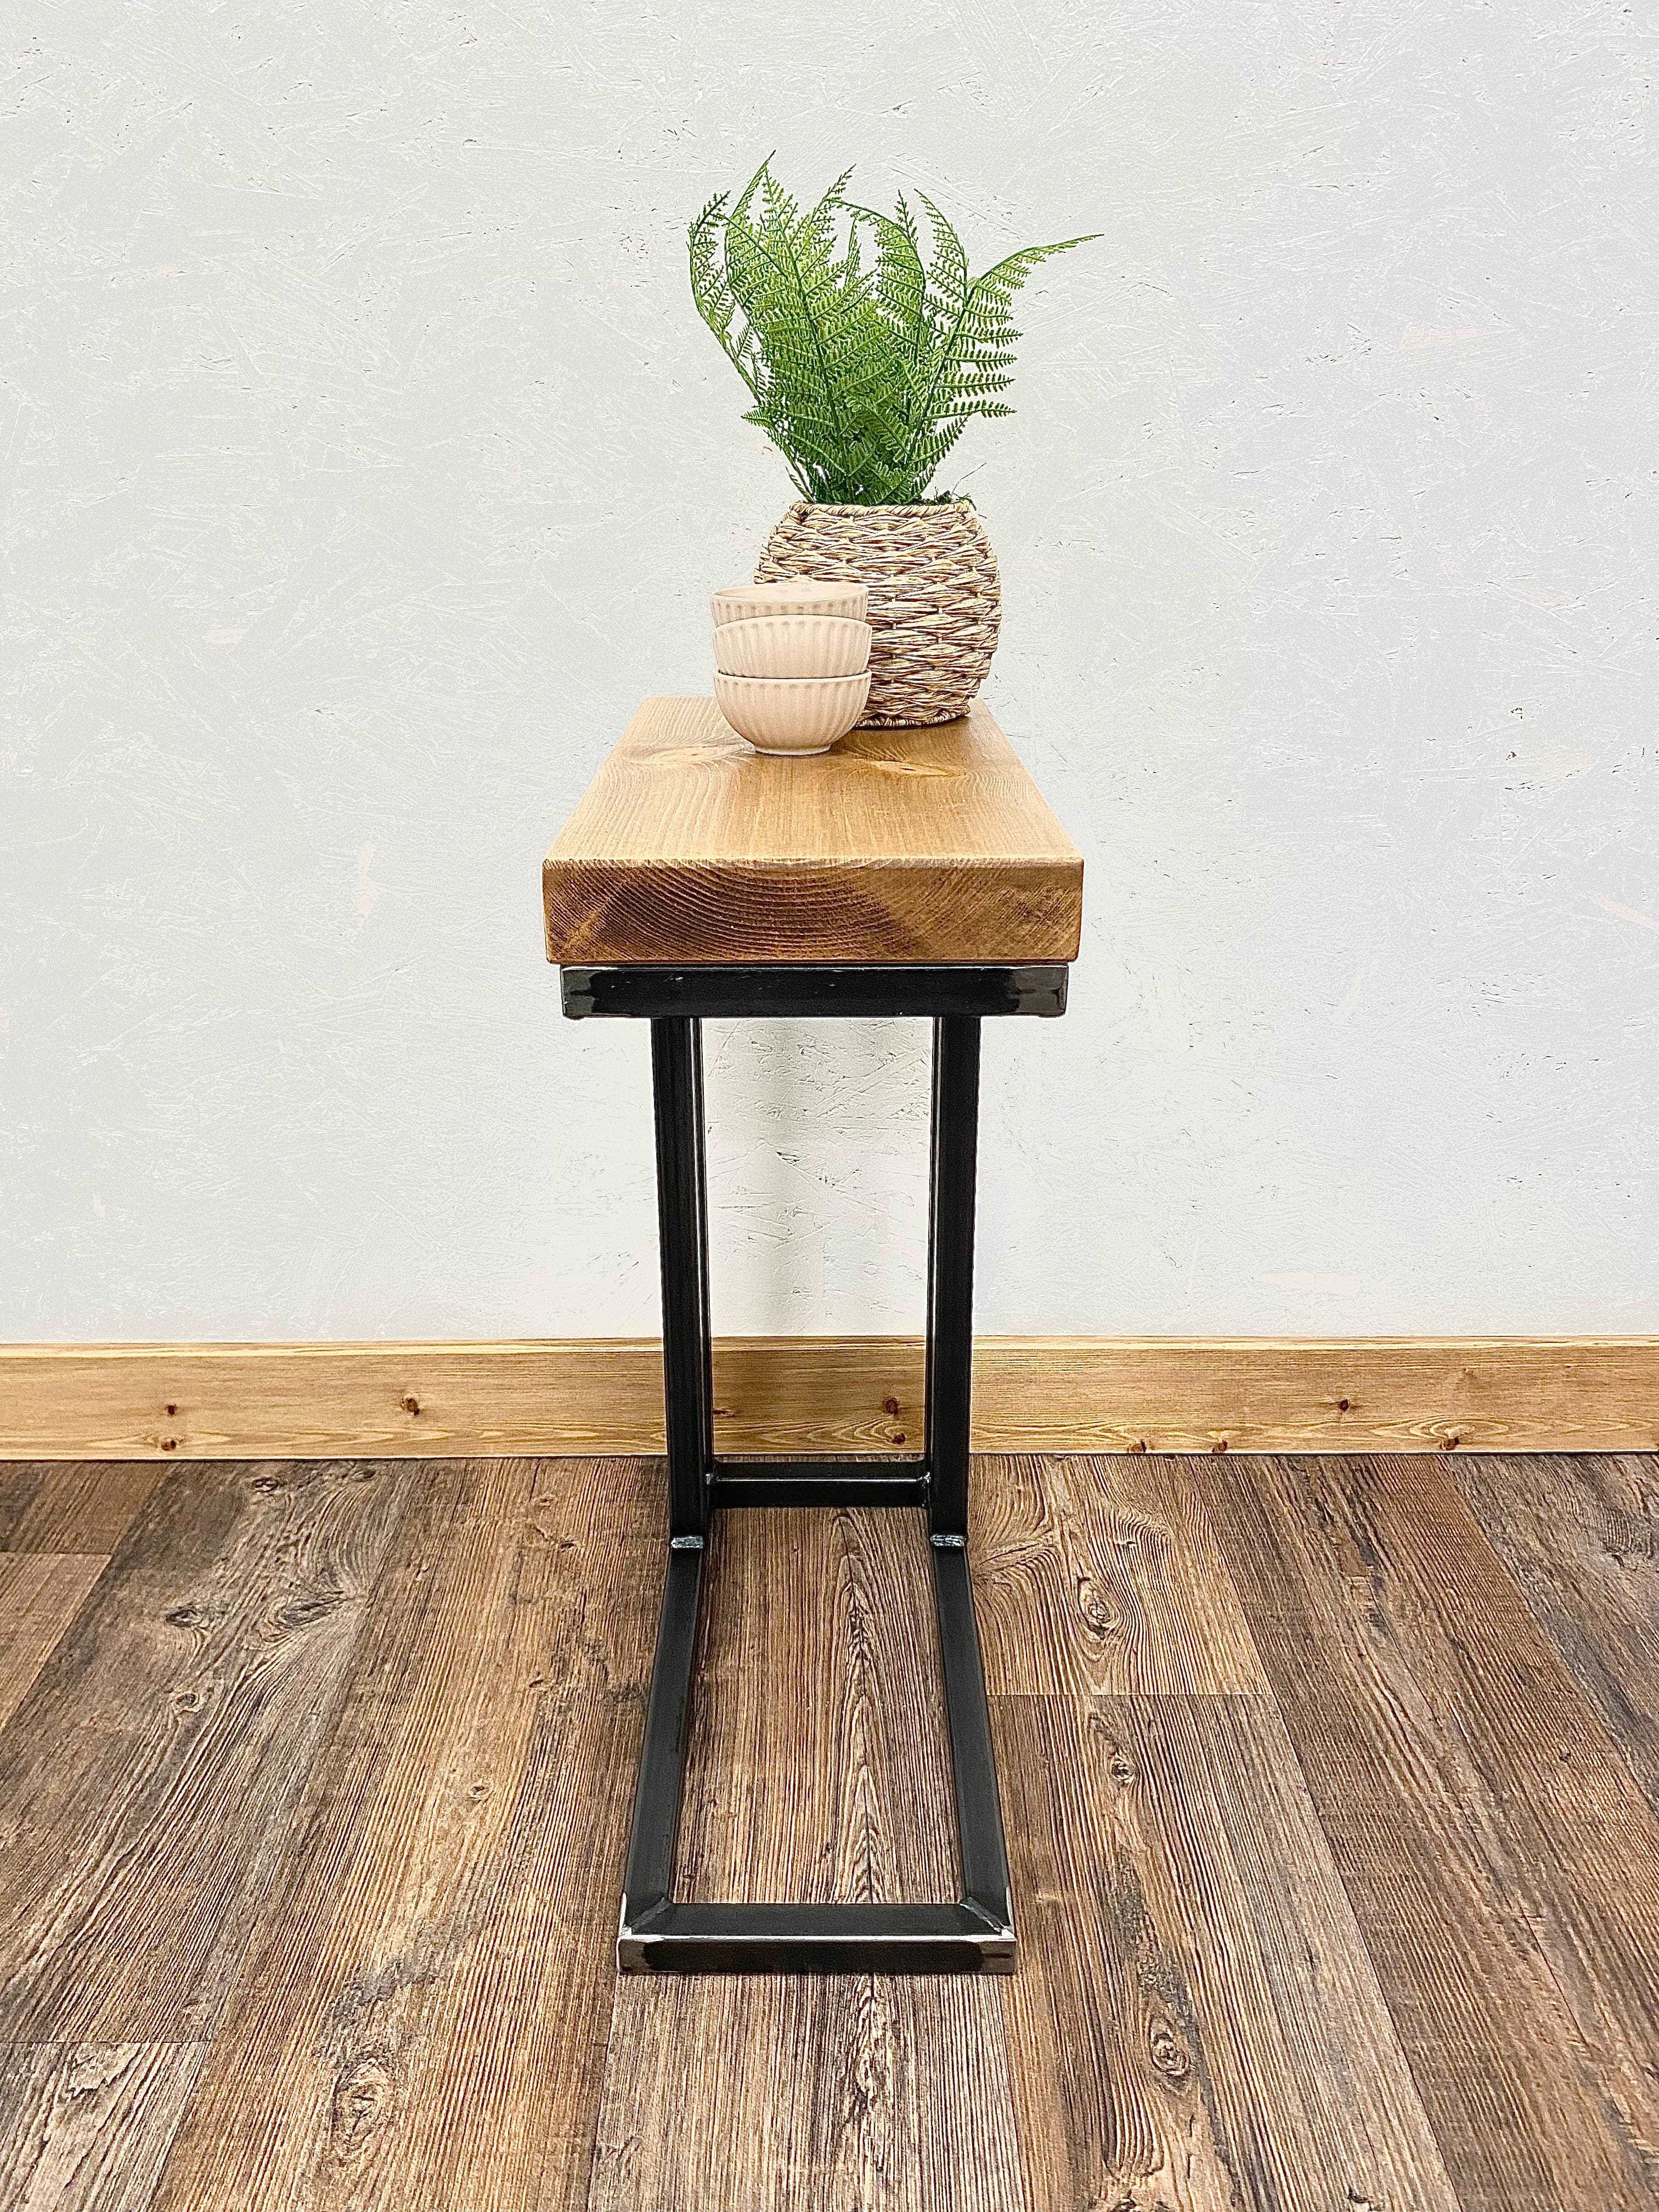 Rustic C Shaped Side Table  RSD Furniture   